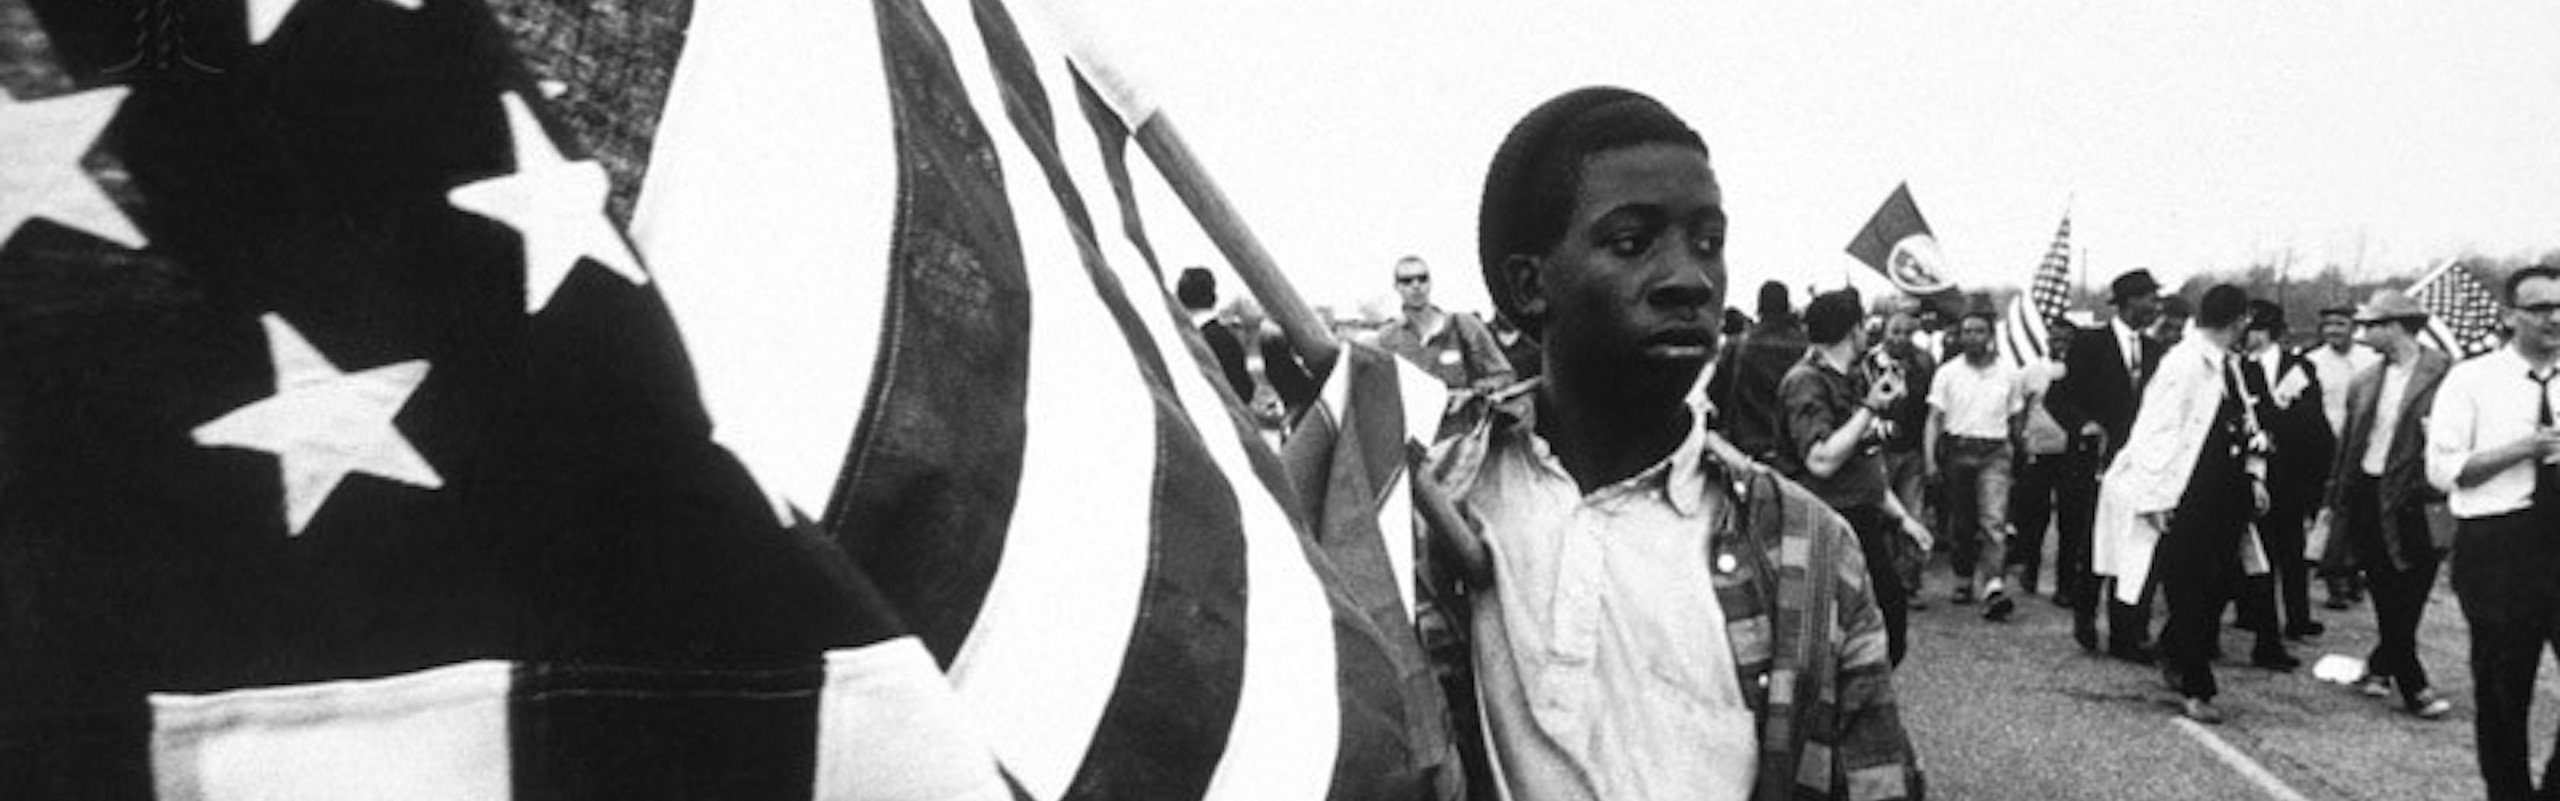 young man marching with american flag